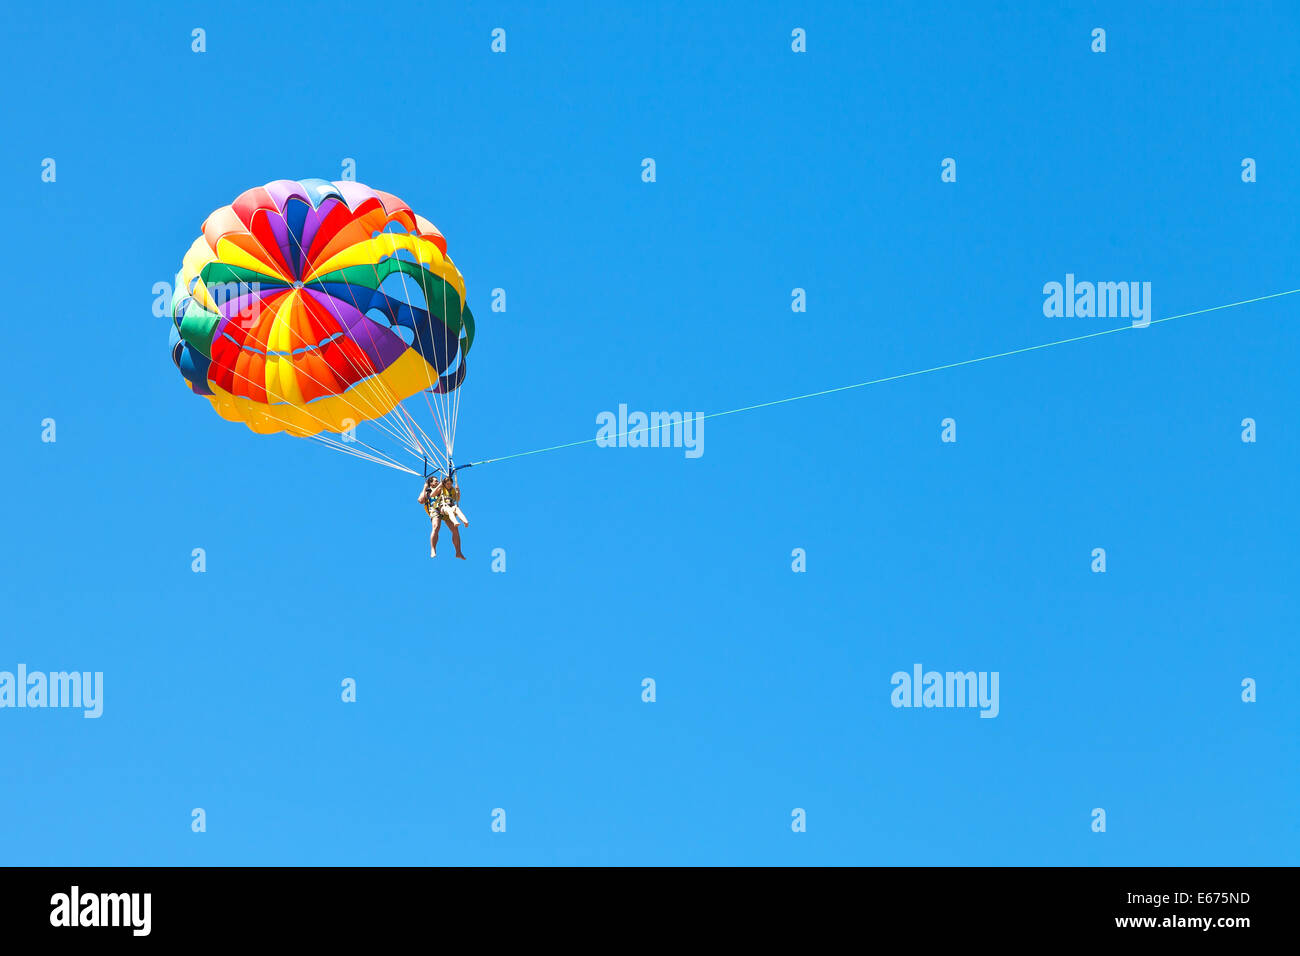 people parascending on parachute in blue sky in summer day Stock Photo